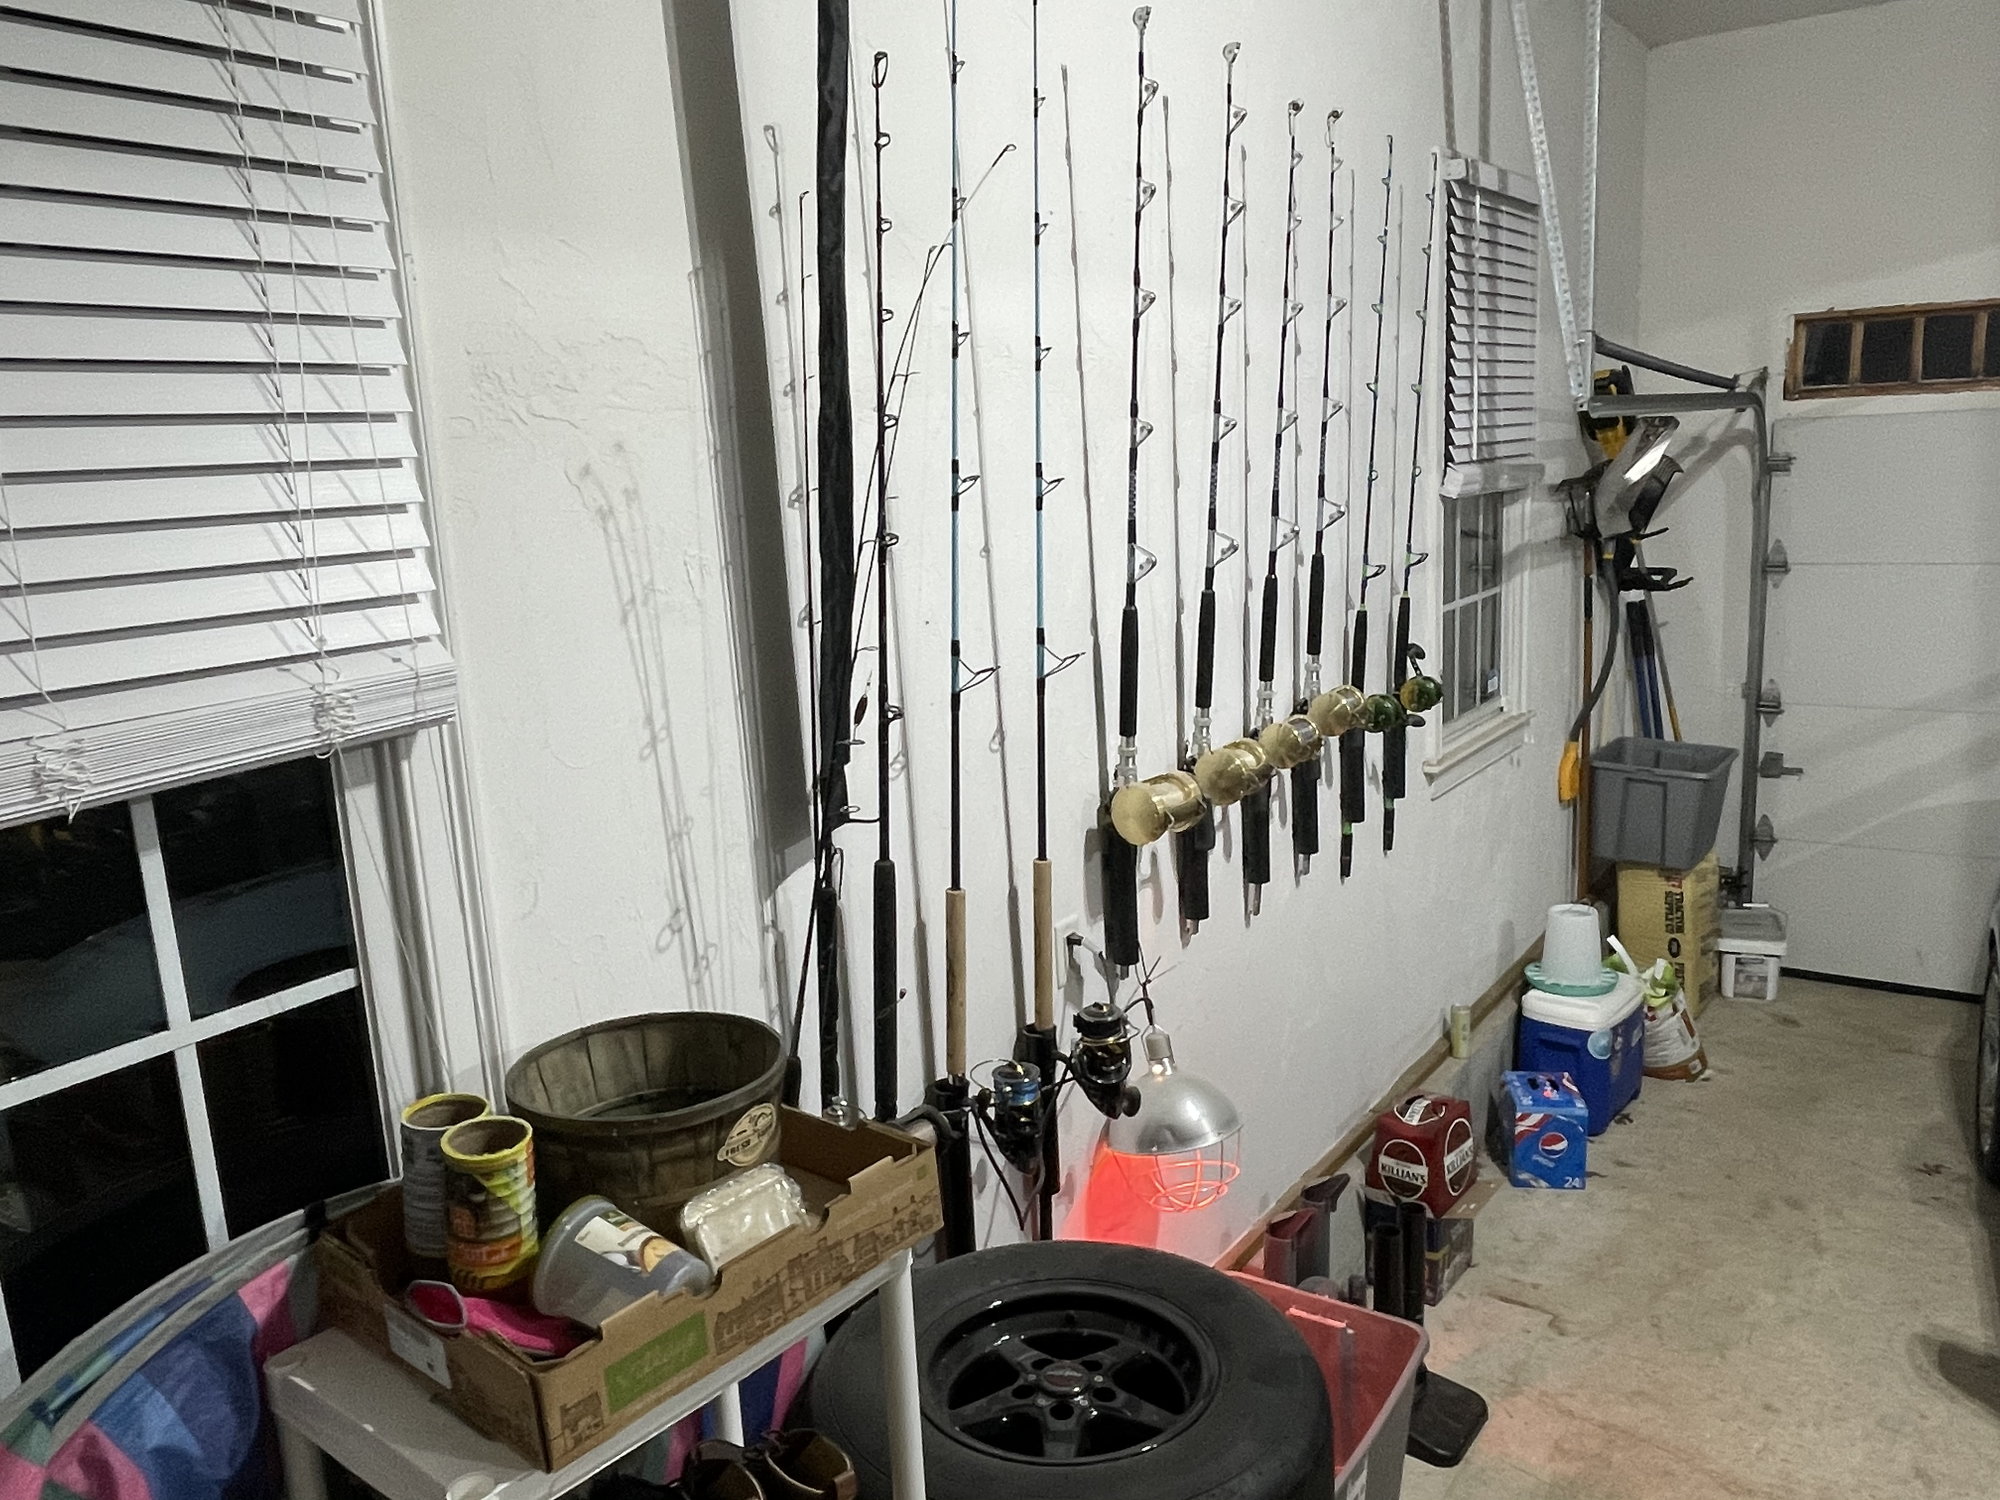 DIY: How to Build a Cheap, Easy Overhead Fishing Rod Storage Rack